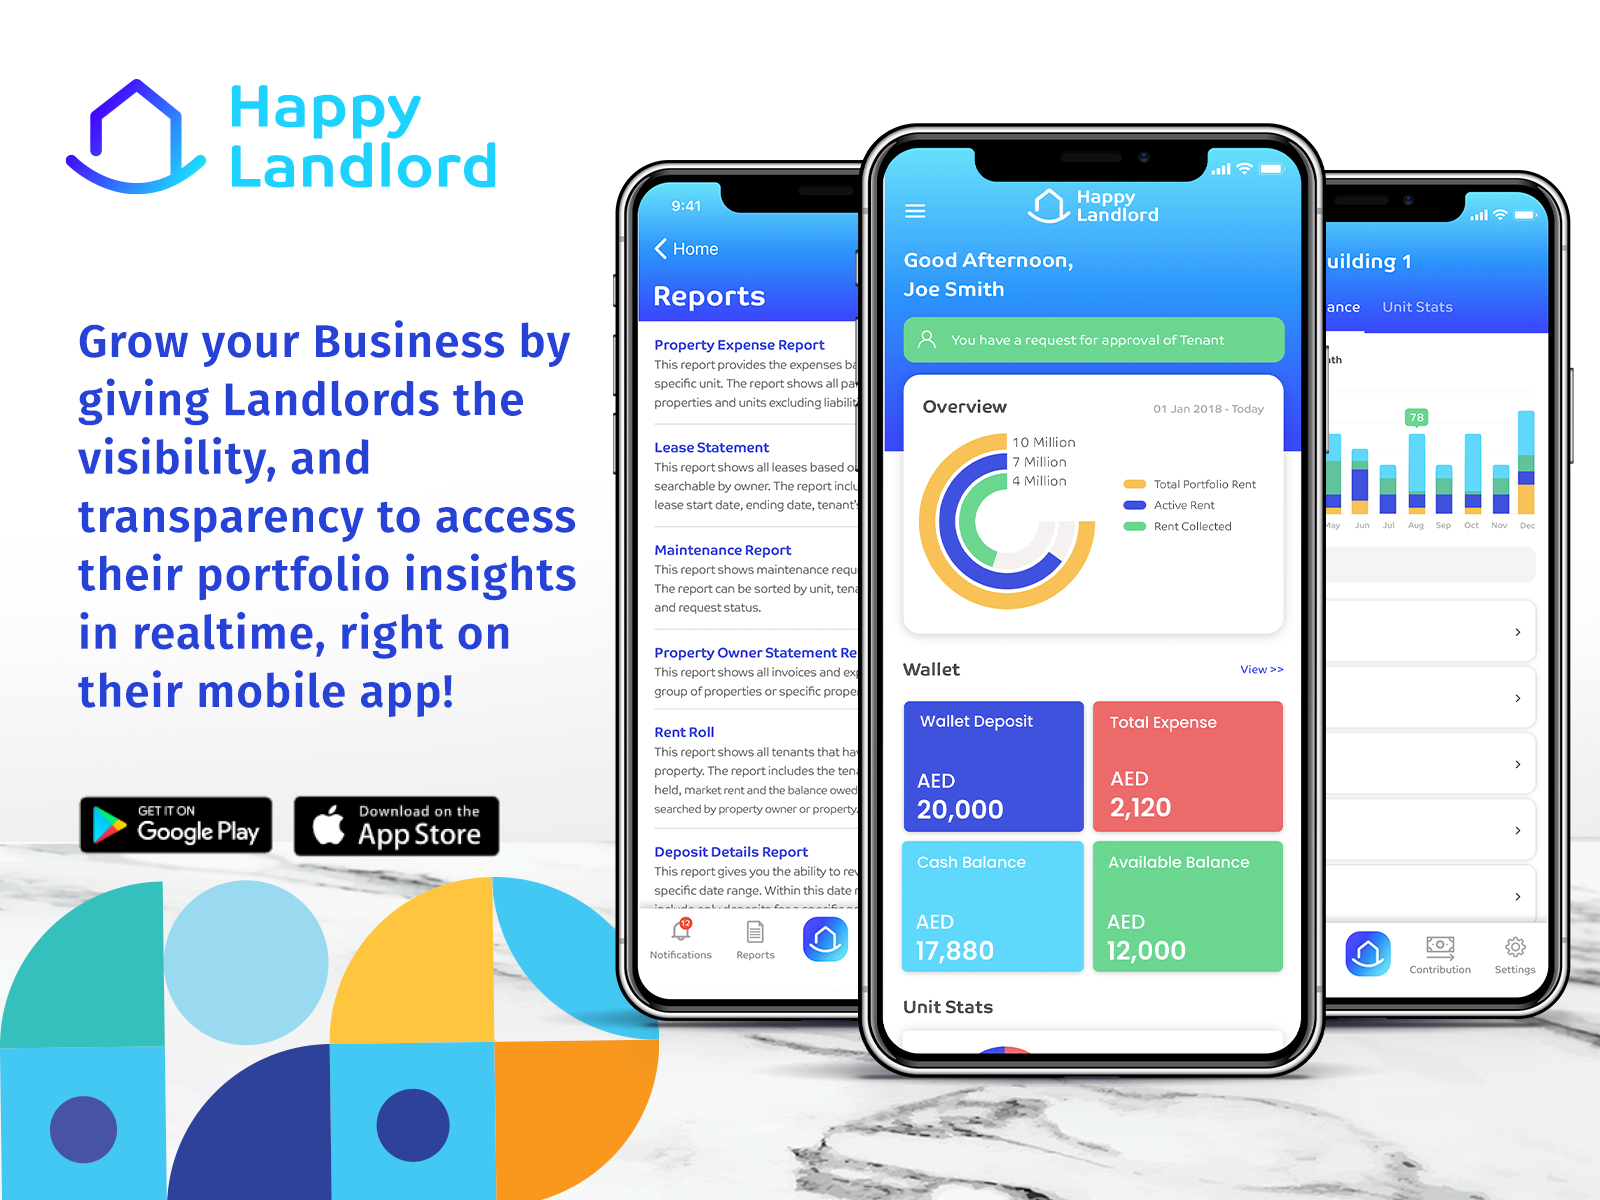 HappyLandlord - mobile app for landlord that allows control, visibility, and transparency by enabling them to view the real-time updates, insights, and reports about their portfolio - eliminating the dependability on property managers.